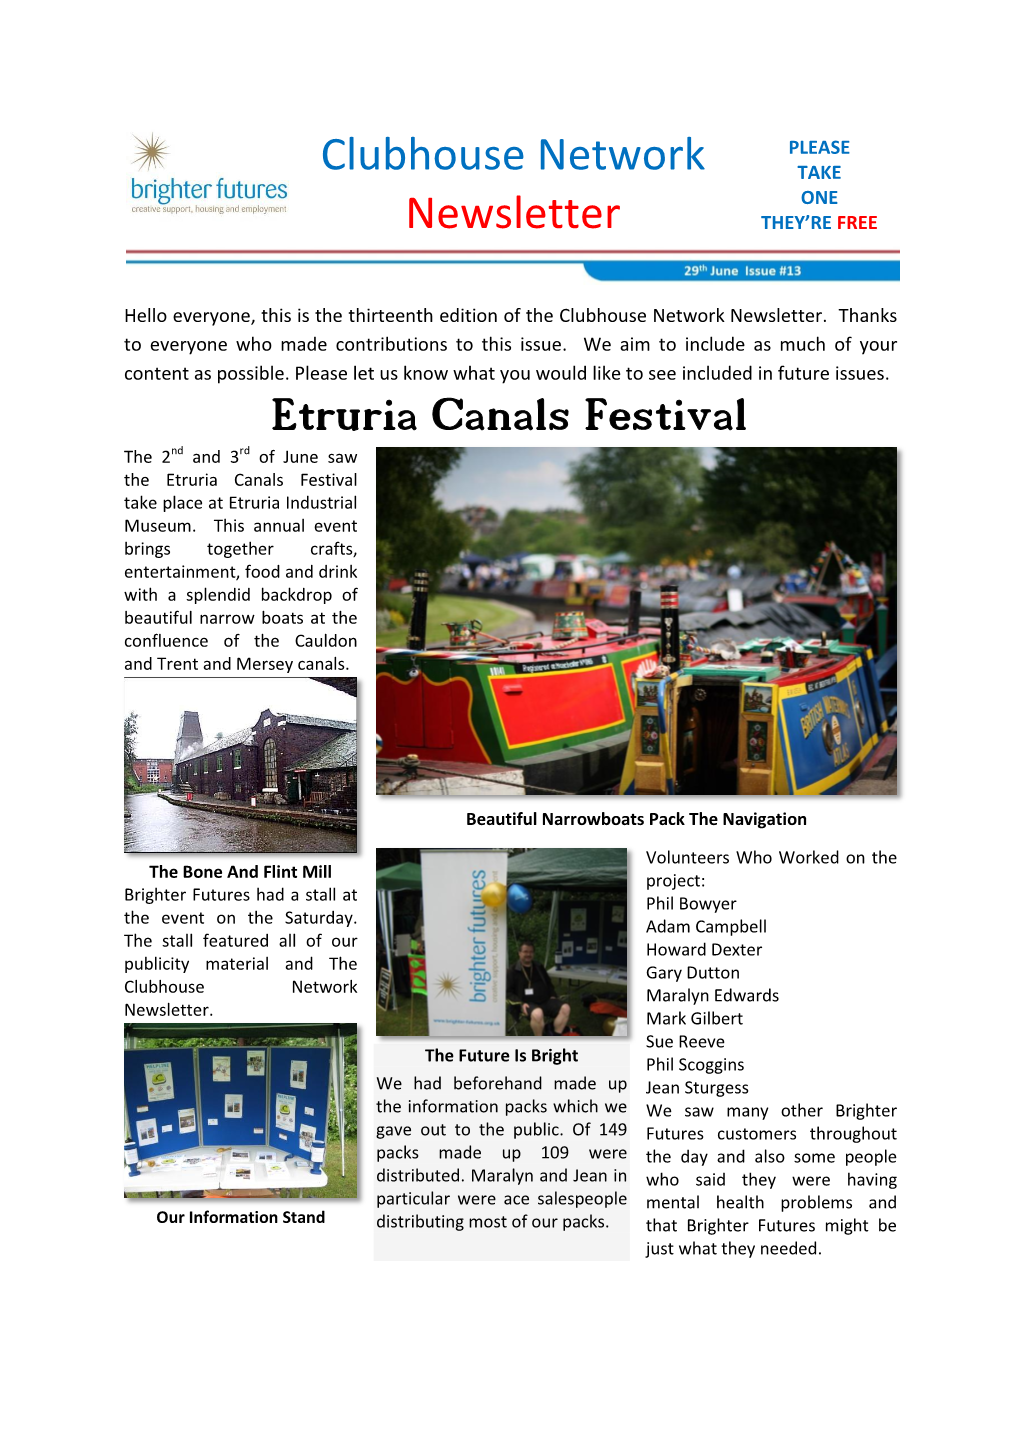 Etruria Canals Festival the 2Nd and 3Rd of June Saw the Etruria Canals Festival Take Place at Etruria Industrial Museum